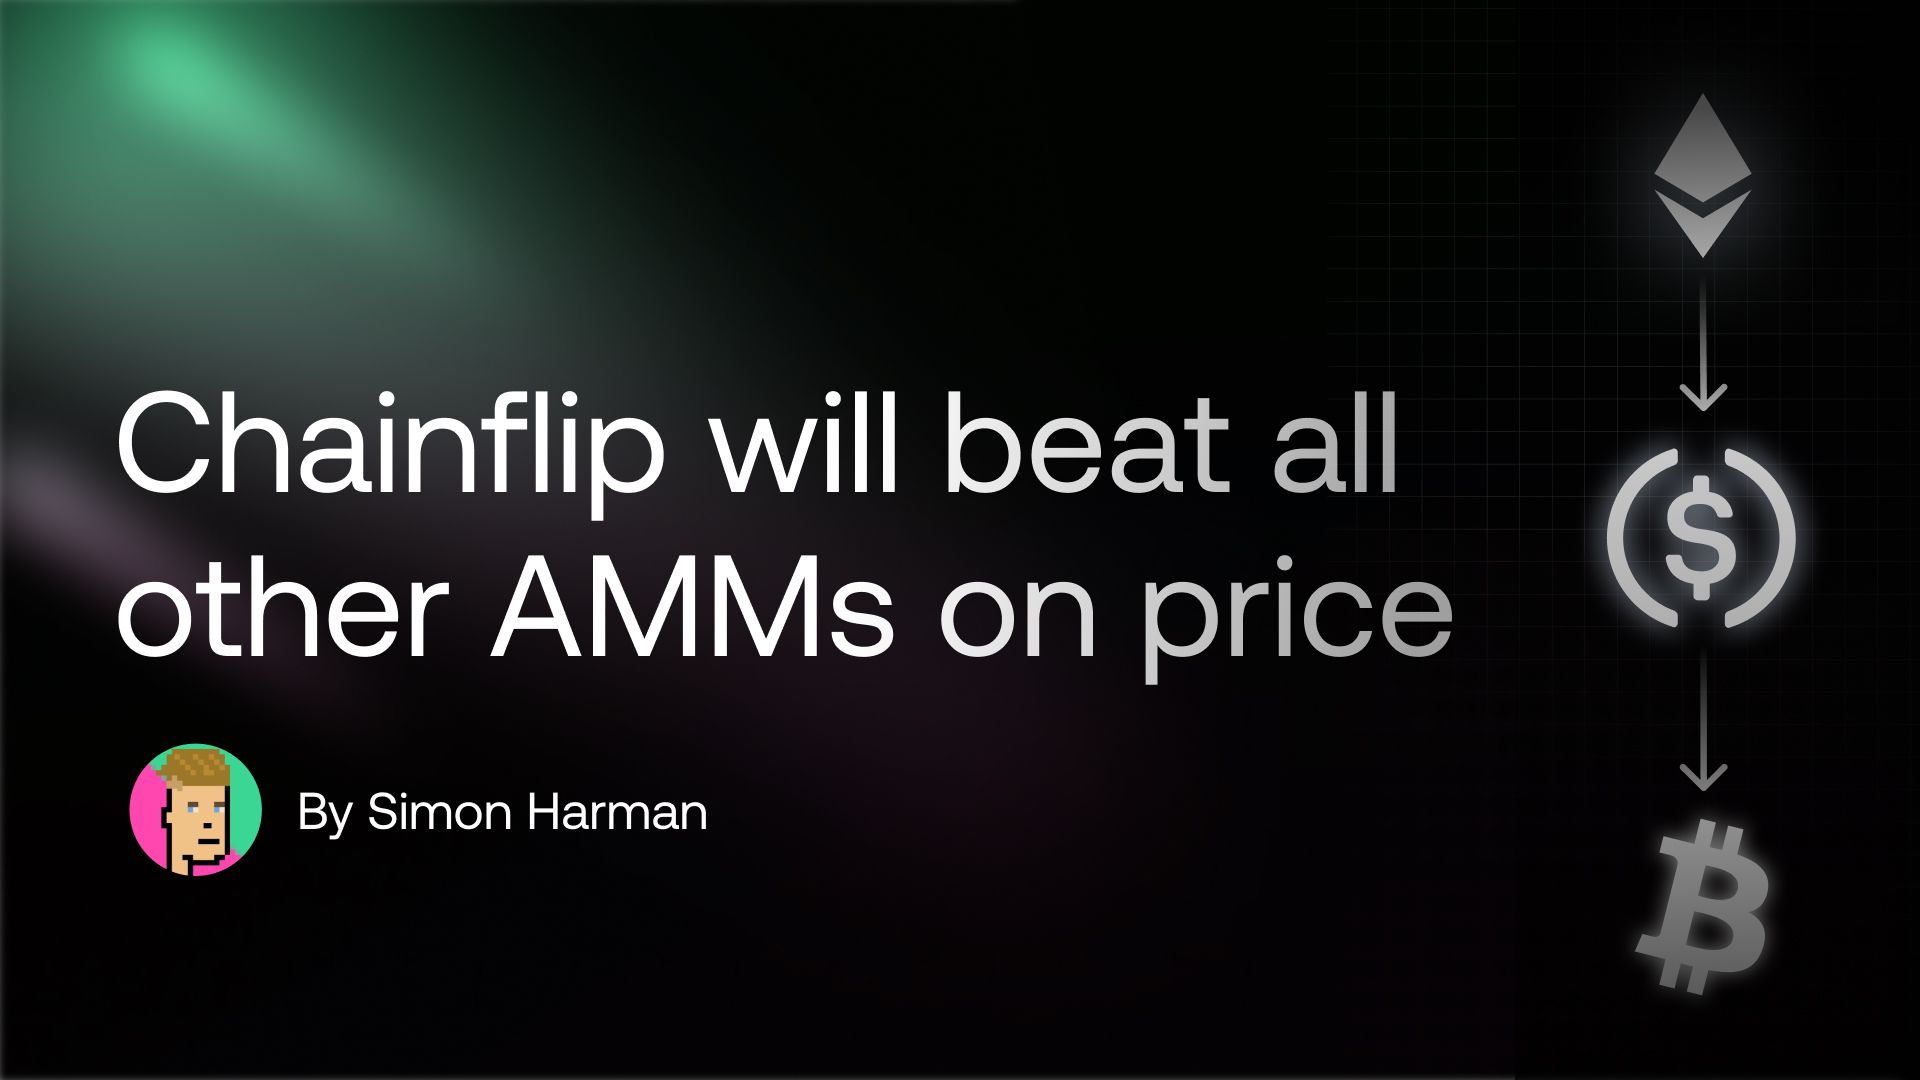 Chainflip will beat all other AMMs on price. Here's how.